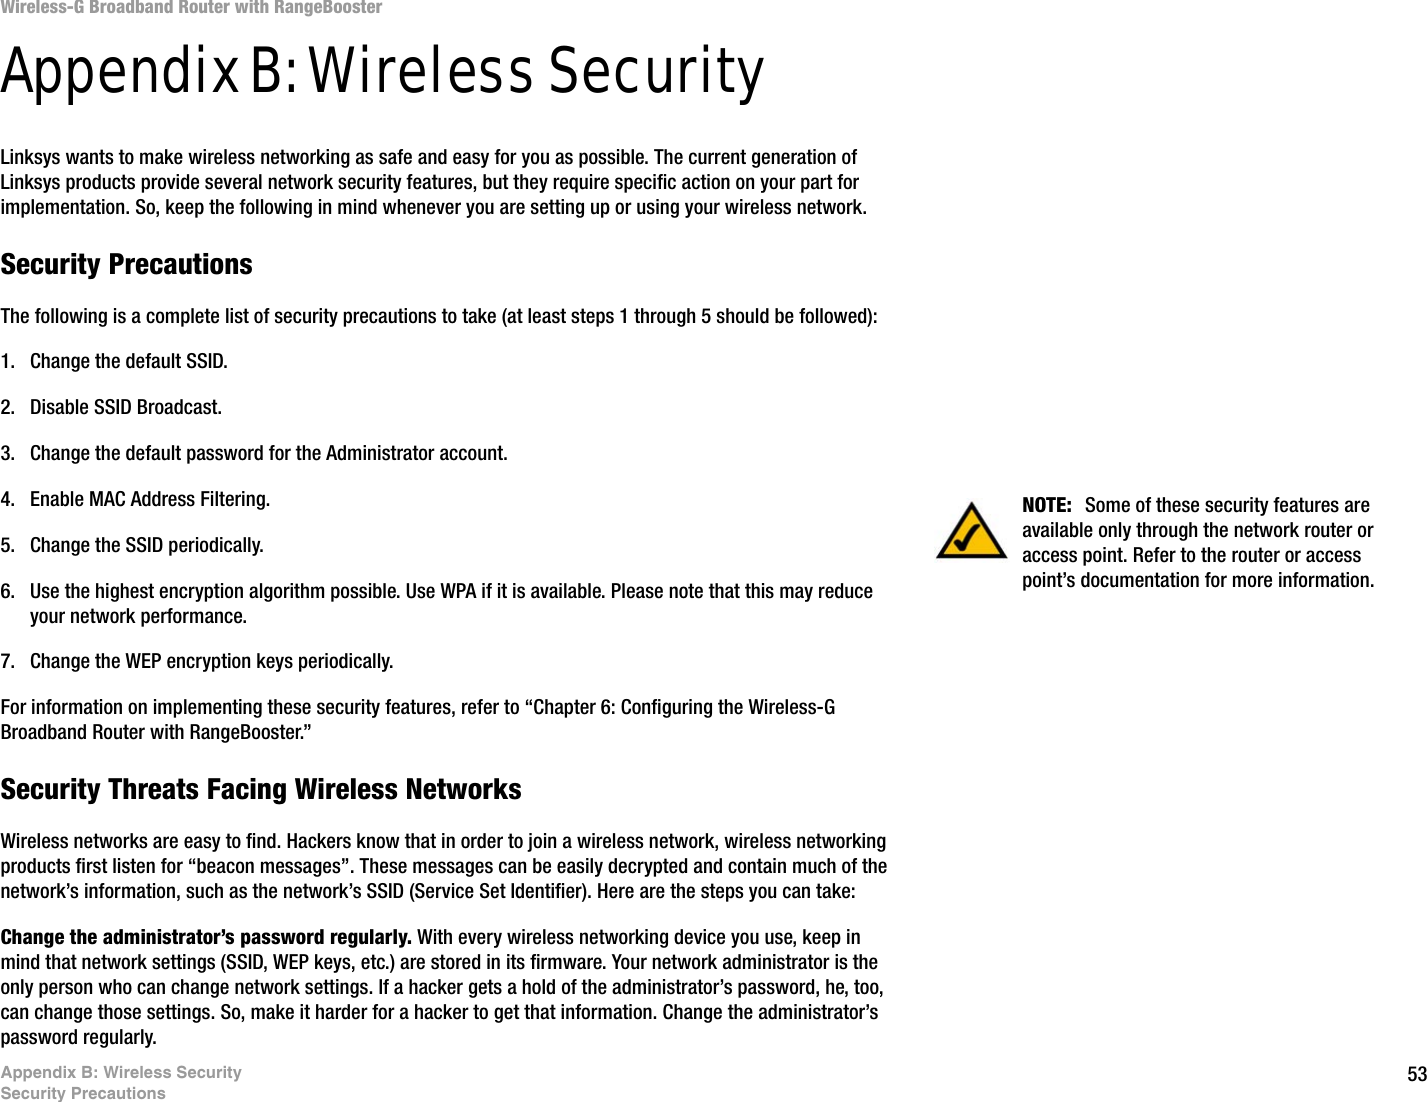 53Appendix B: Wireless SecuritySecurity PrecautionsWireless-G Broadband Router with RangeBoosterAppendix B: Wireless SecurityLinksys wants to make wireless networking as safe and easy for you as possible. The current generation of Linksys products provide several network security features, but they require specific action on your part for implementation. So, keep the following in mind whenever you are setting up or using your wireless network.Security PrecautionsThe following is a complete list of security precautions to take (at least steps 1 through 5 should be followed):1. Change the default SSID. 2. Disable SSID Broadcast. 3. Change the default password for the Administrator account. 4. Enable MAC Address Filtering. 5. Change the SSID periodically. 6. Use the highest encryption algorithm possible. Use WPA if it is available. Please note that this may reduce your network performance. 7. Change the WEP encryption keys periodically. For information on implementing these security features, refer to “Chapter 6: Configuring the Wireless-G Broadband Router with RangeBooster.”Security Threats Facing Wireless Networks Wireless networks are easy to find. Hackers know that in order to join a wireless network, wireless networking products first listen for “beacon messages”. These messages can be easily decrypted and contain much of the network’s information, such as the network’s SSID (Service Set Identifier). Here are the steps you can take:Change the administrator’s password regularly. With every wireless networking device you use, keep in mind that network settings (SSID, WEP keys, etc.) are stored in its firmware. Your network administrator is the only person who can change network settings. If a hacker gets a hold of the administrator’s password, he, too, can change those settings. So, make it harder for a hacker to get that information. Change the administrator’s password regularly.NOTE:  Some of these security features are available only through the network router or access point. Refer to the router or access point’s documentation for more information.